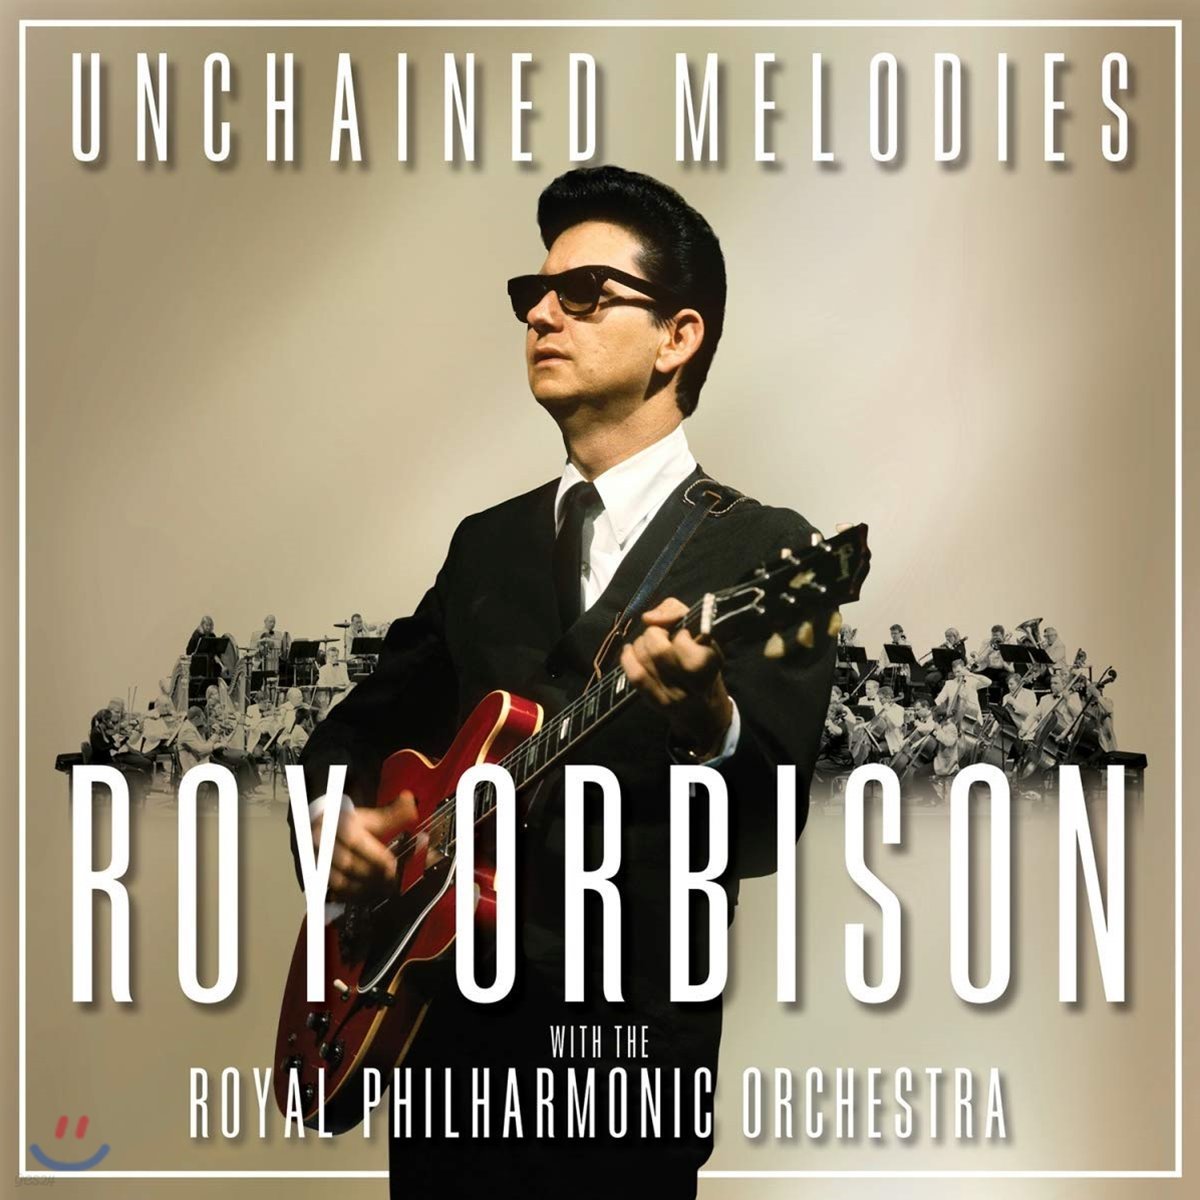 Roy Orbison &amp; The Royal Philharmonic Orchestra (로이 오비슨, 로열 필하모닉 오케스트라) - Unchained Melodies Vol.2